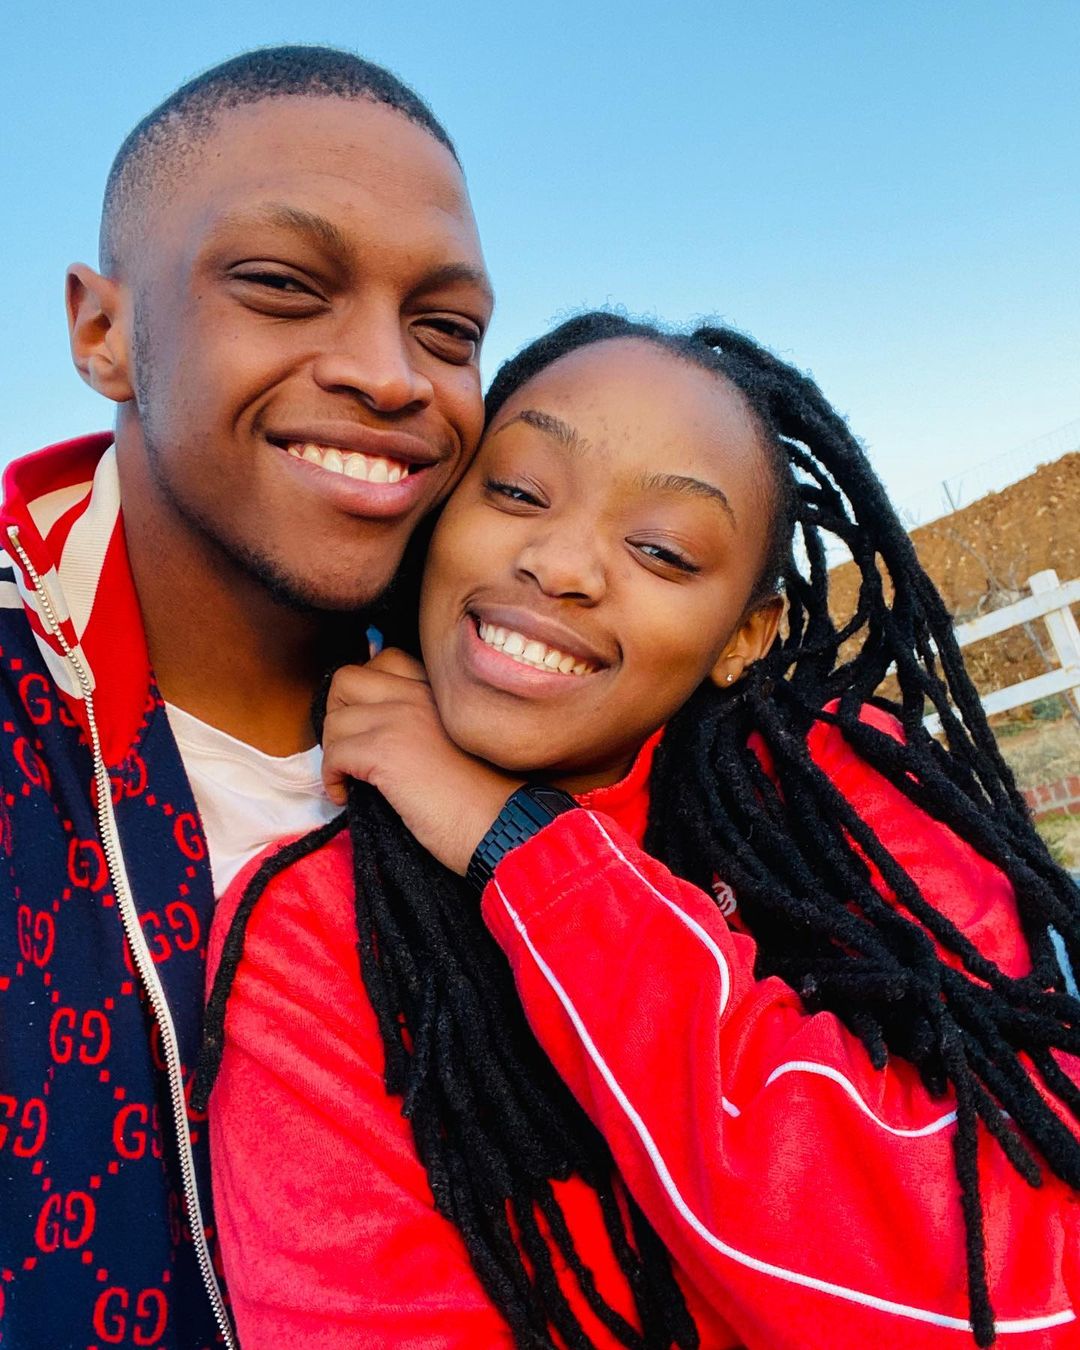 20 Hot Instagram Pictures Of Andiswa Selepe & DJ Melzi Tumelo Mphai: The  Bomb RSA Husband, Fiancé, Dating